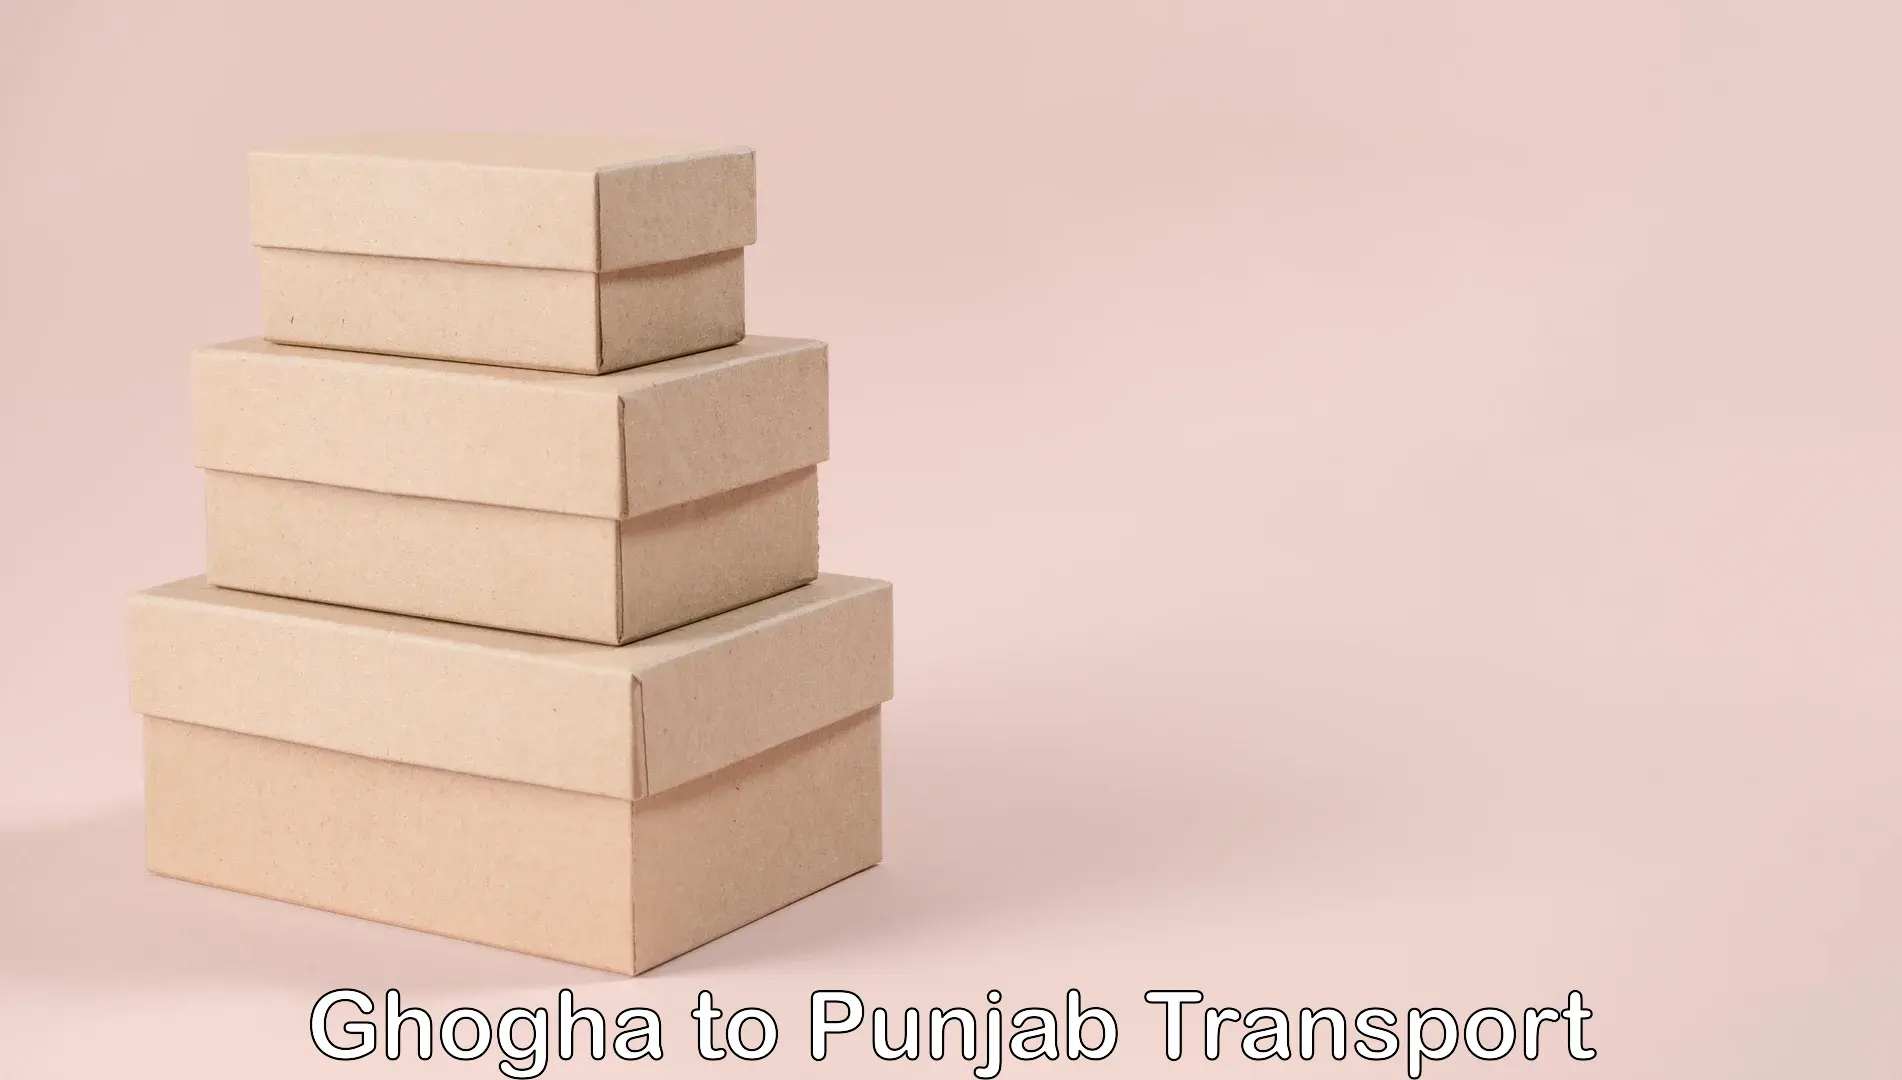 Online transport service Ghogha to Mohali